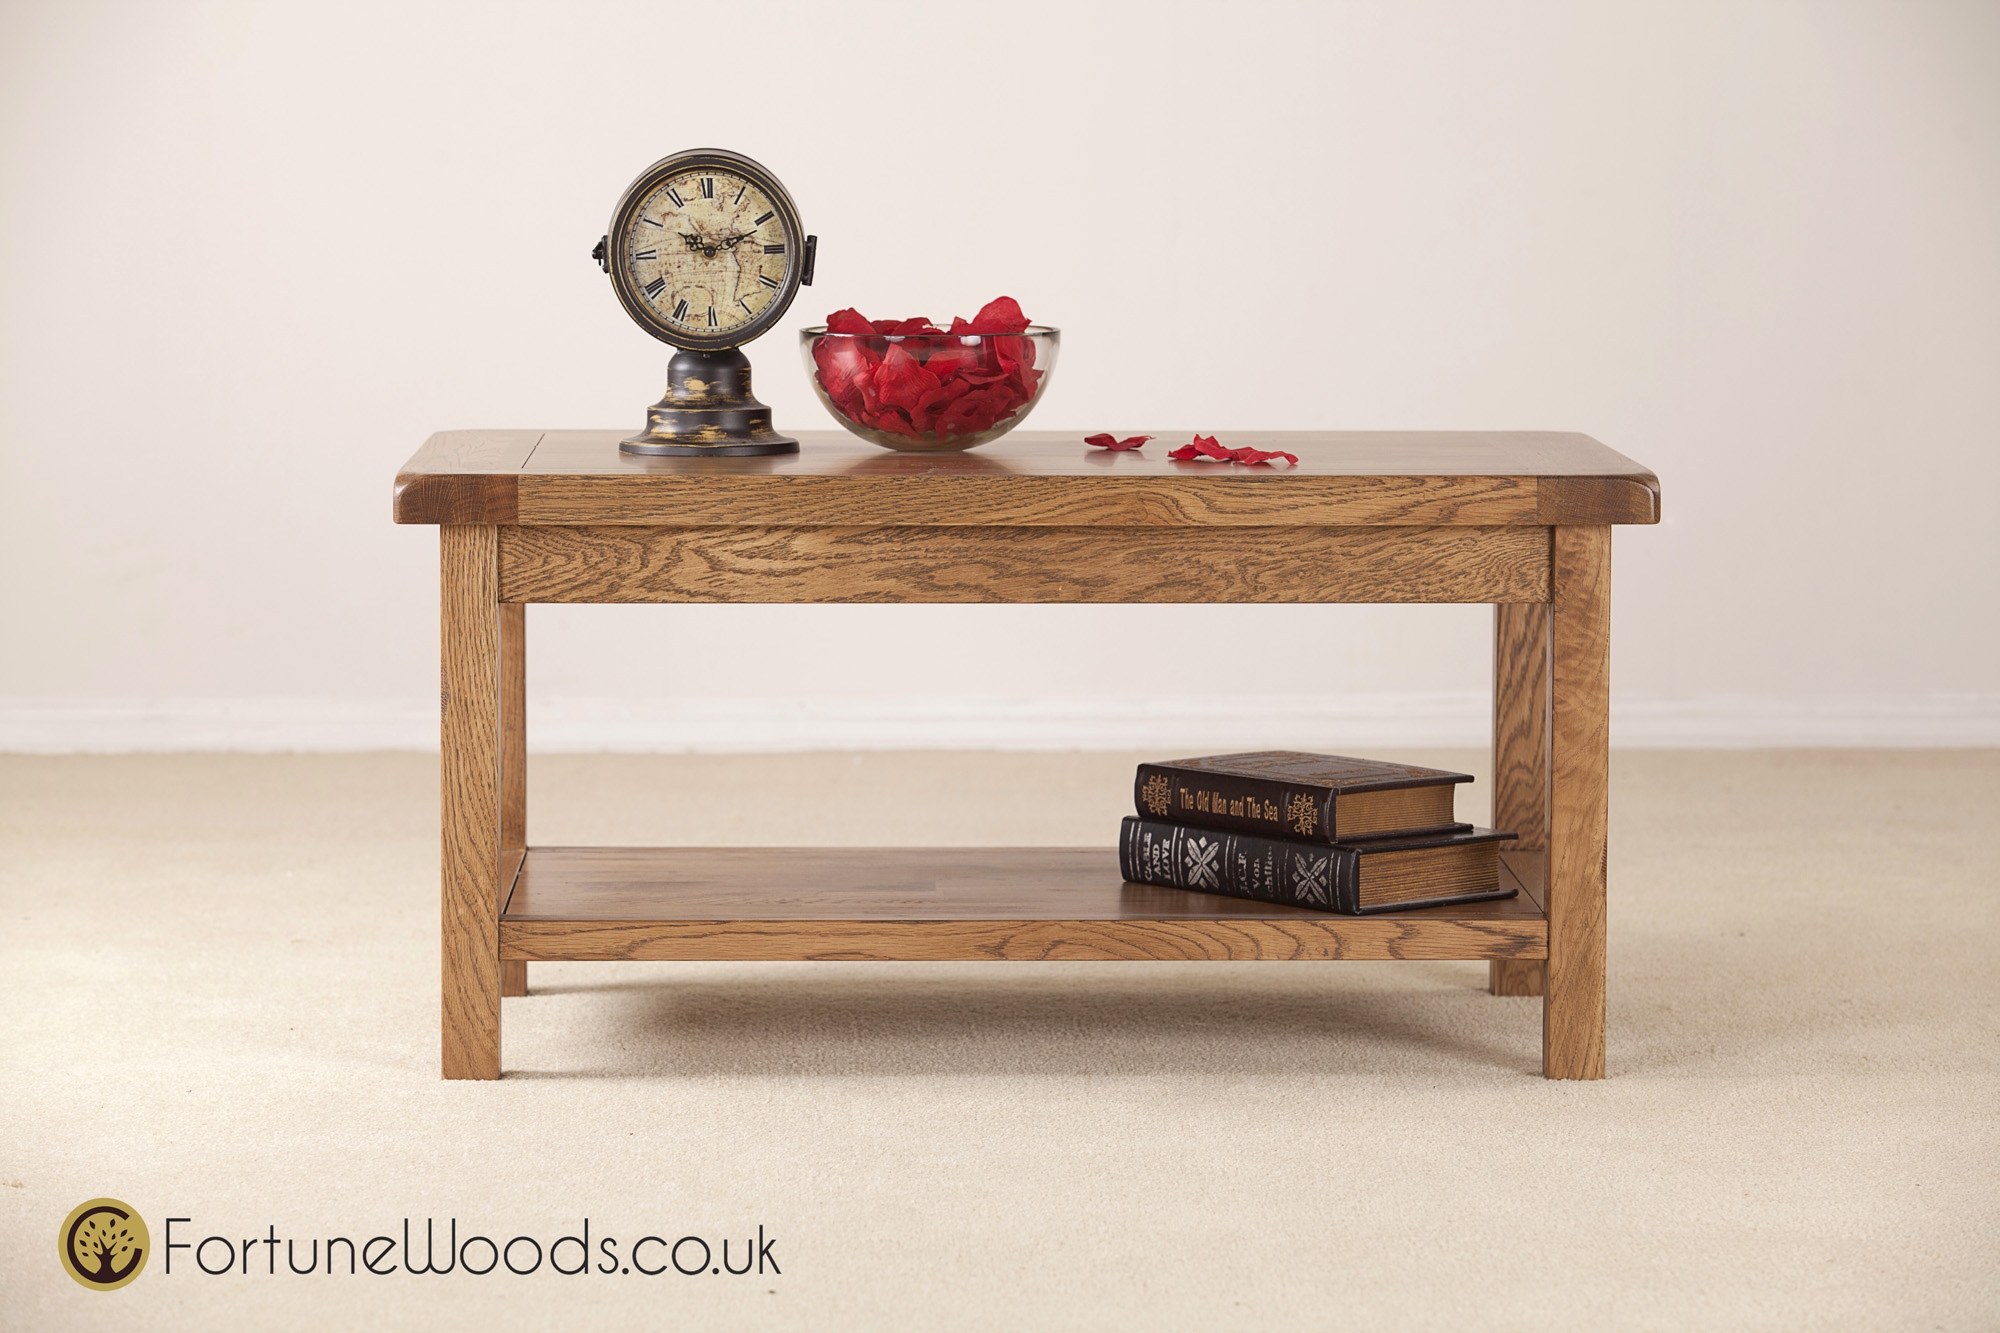 Fortune Woods Rustic Coffee Table